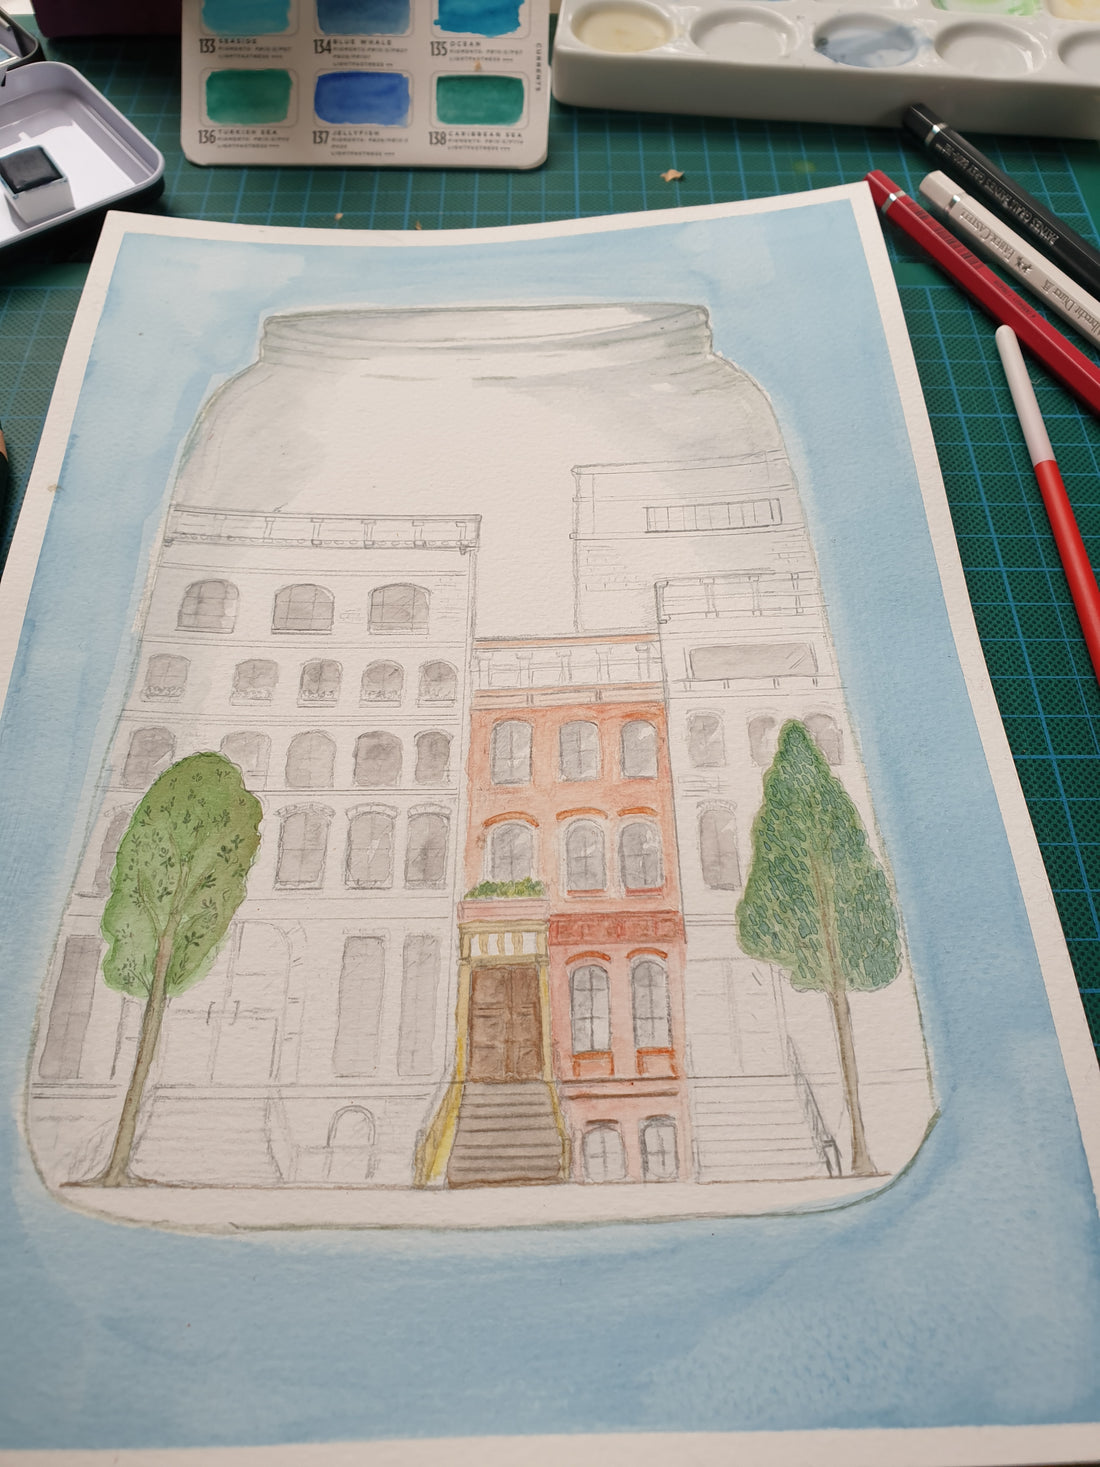 Work in progress image of whimsical city in a terrarium.